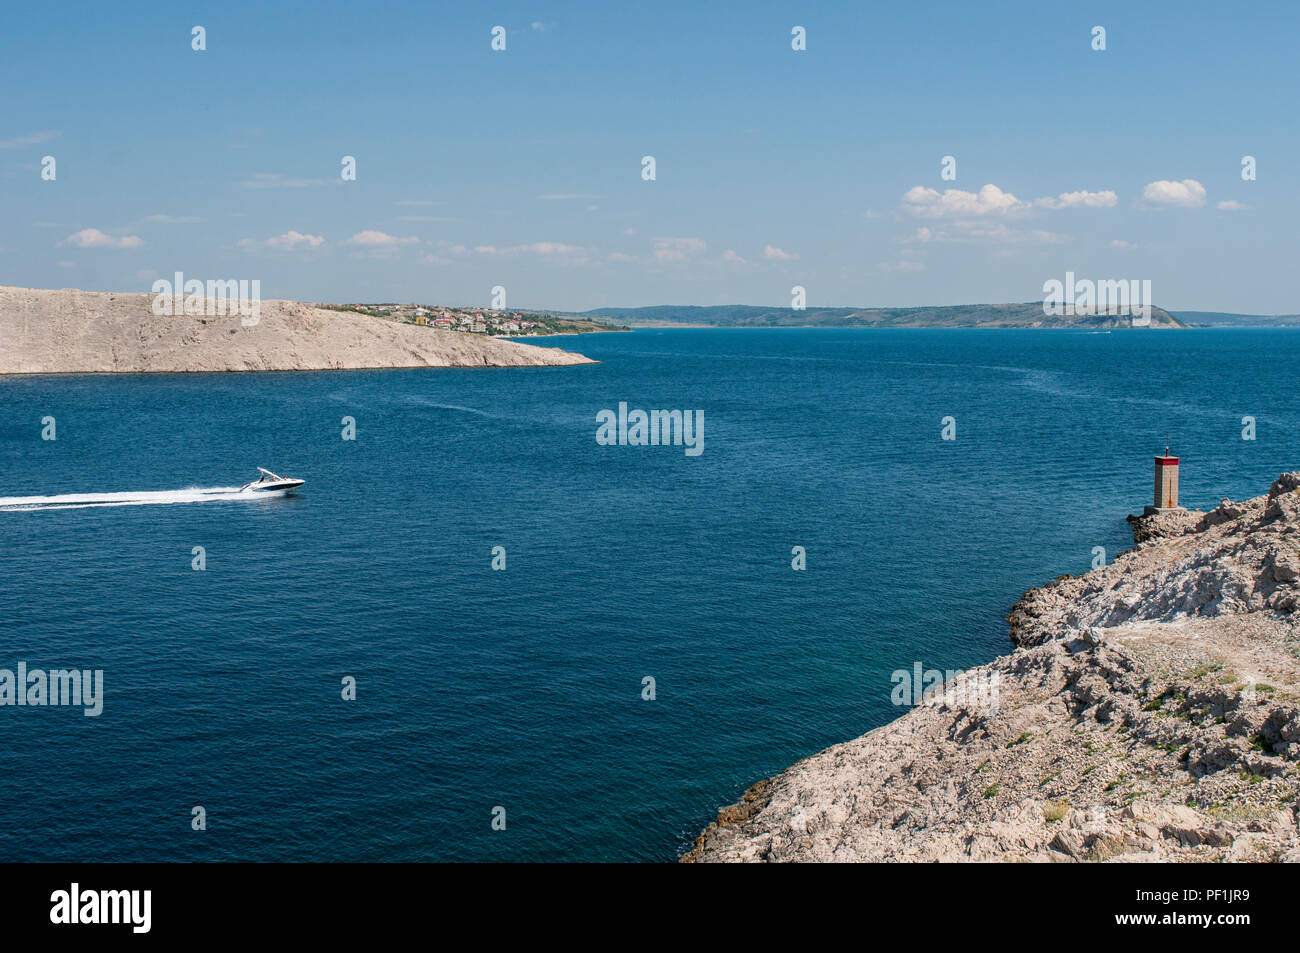 Croatia: a speedboat and the little red lighthouse on the cliff in front of Paški Most, the 1968 bridge that connects the main land and the Pag island Stock Photo